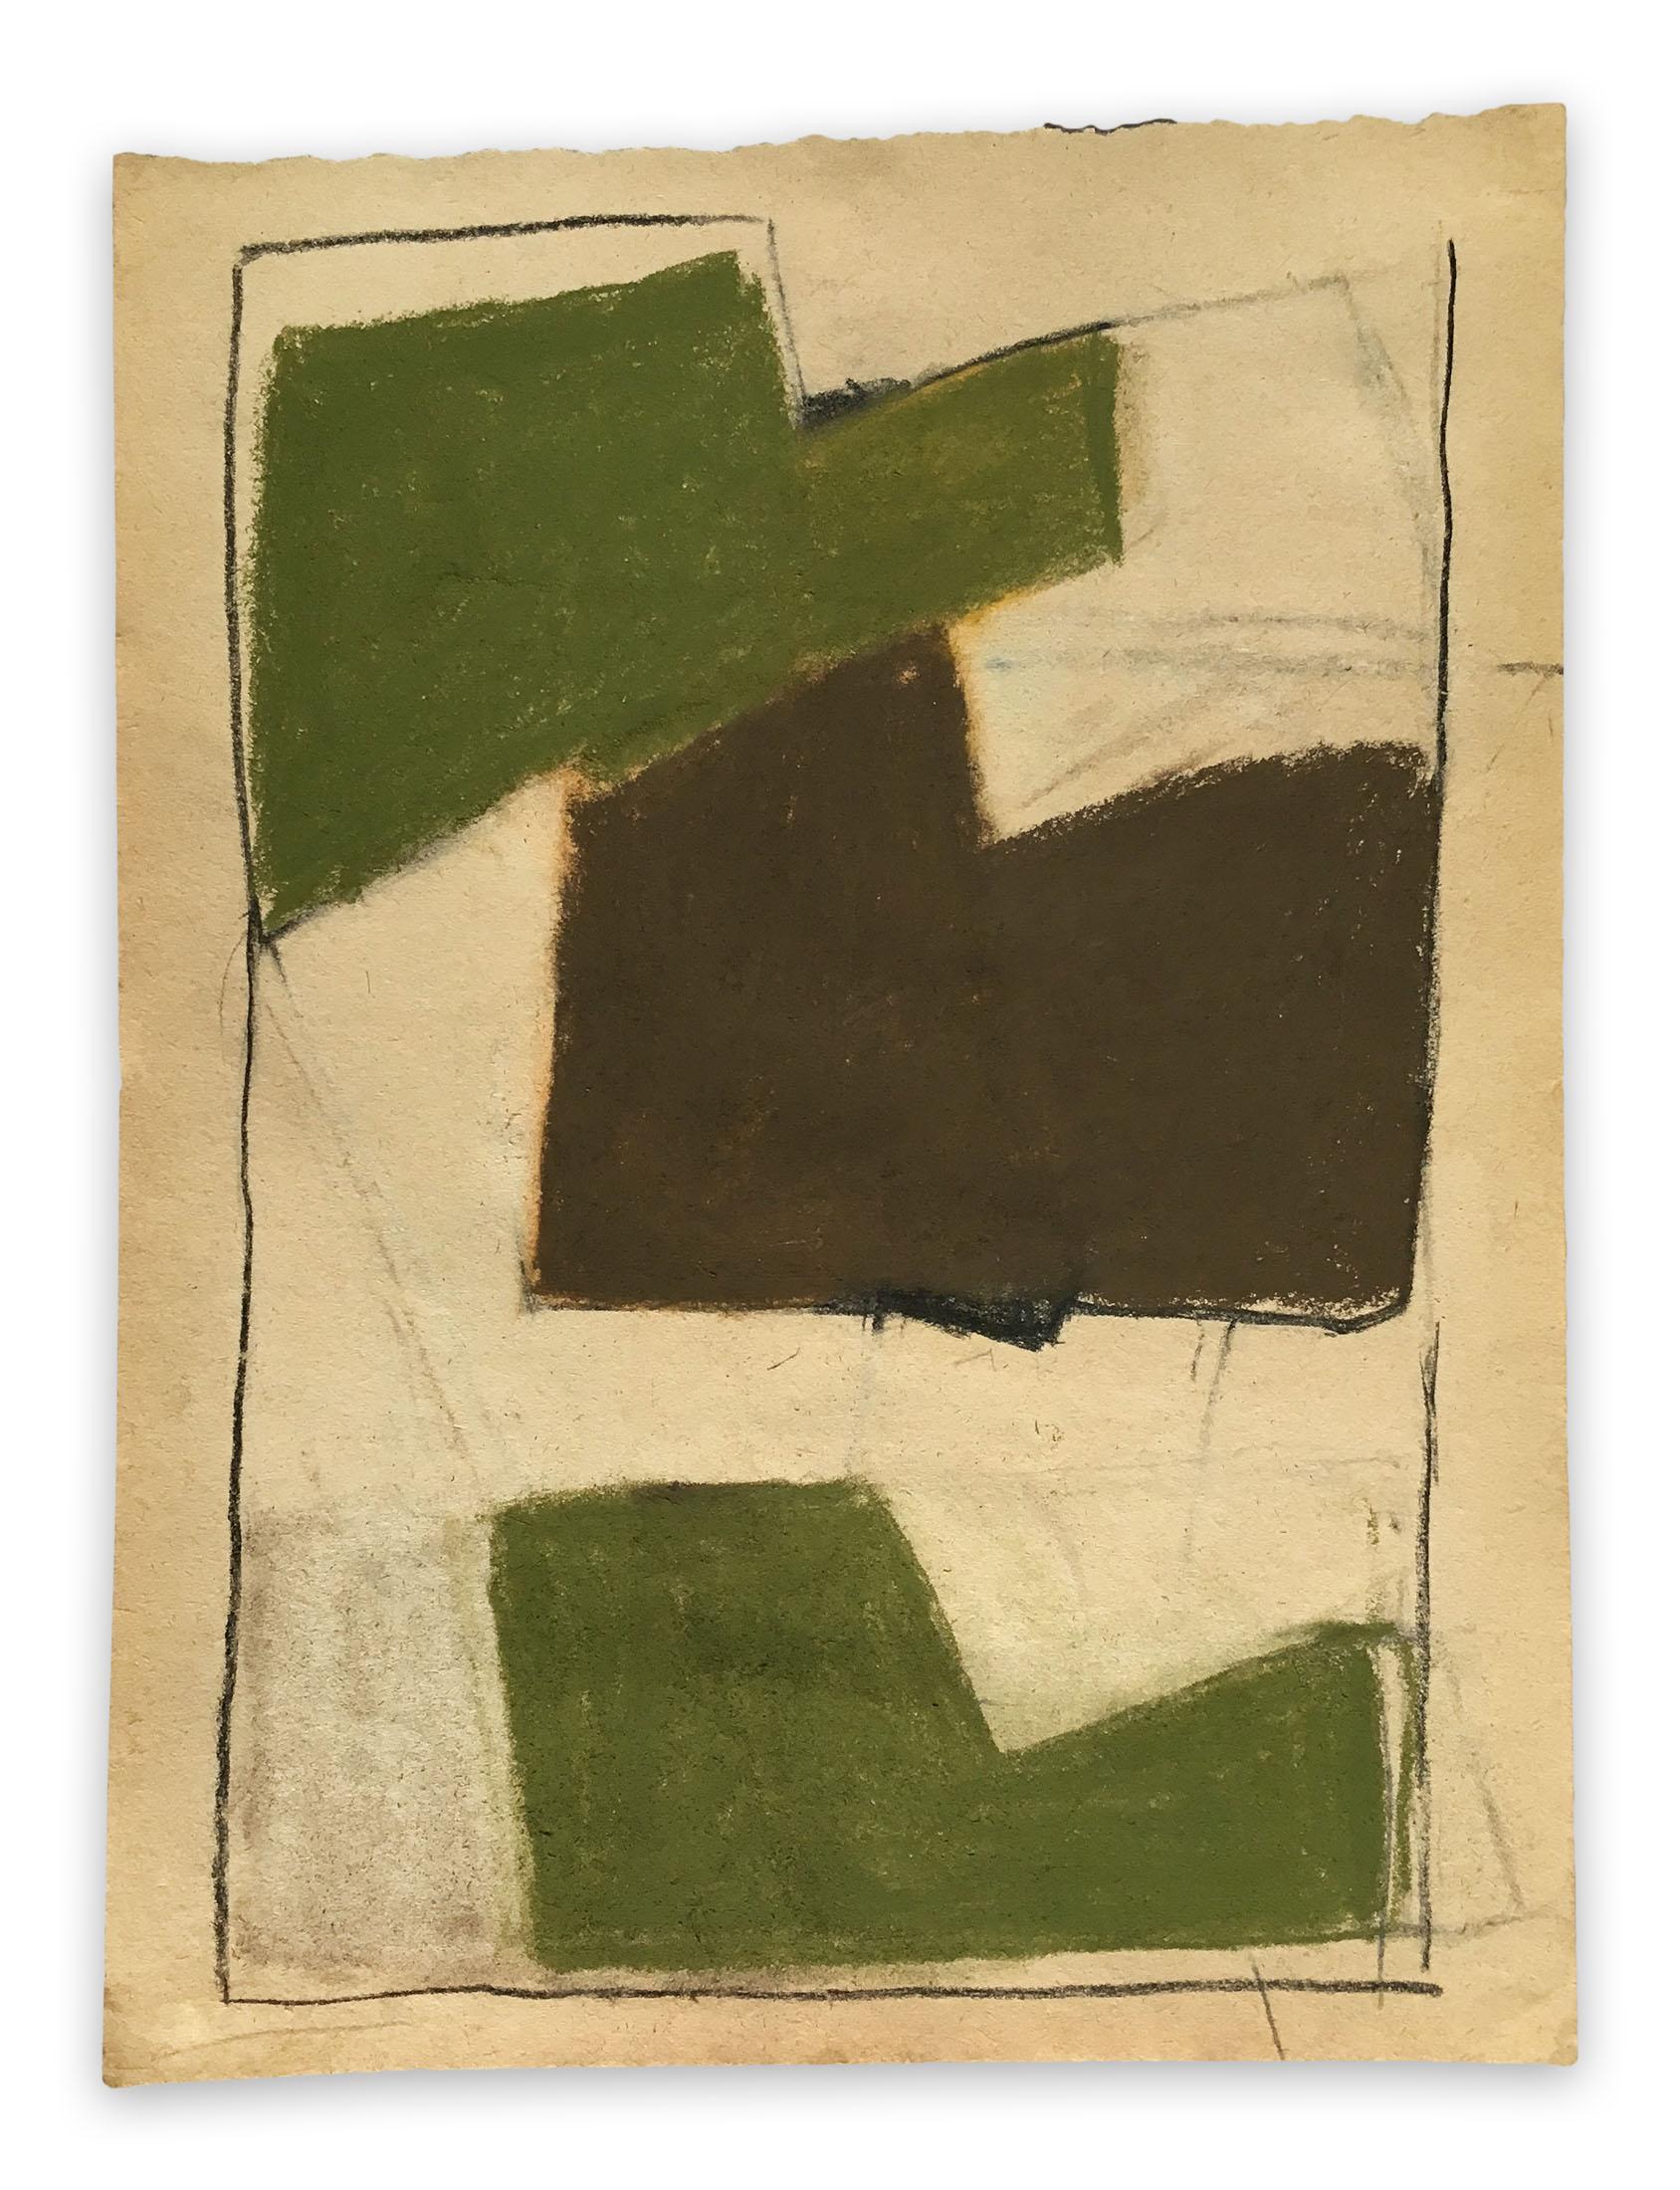 Untitled 2002 (Abstract Painting)

Pastel on paper - Unframed.

In her abstract drawings, collages and paintings, Fieroza Doorsen brings to life the tensions and harmonies that emerge when structure meets intuition. Her visual language occupies a